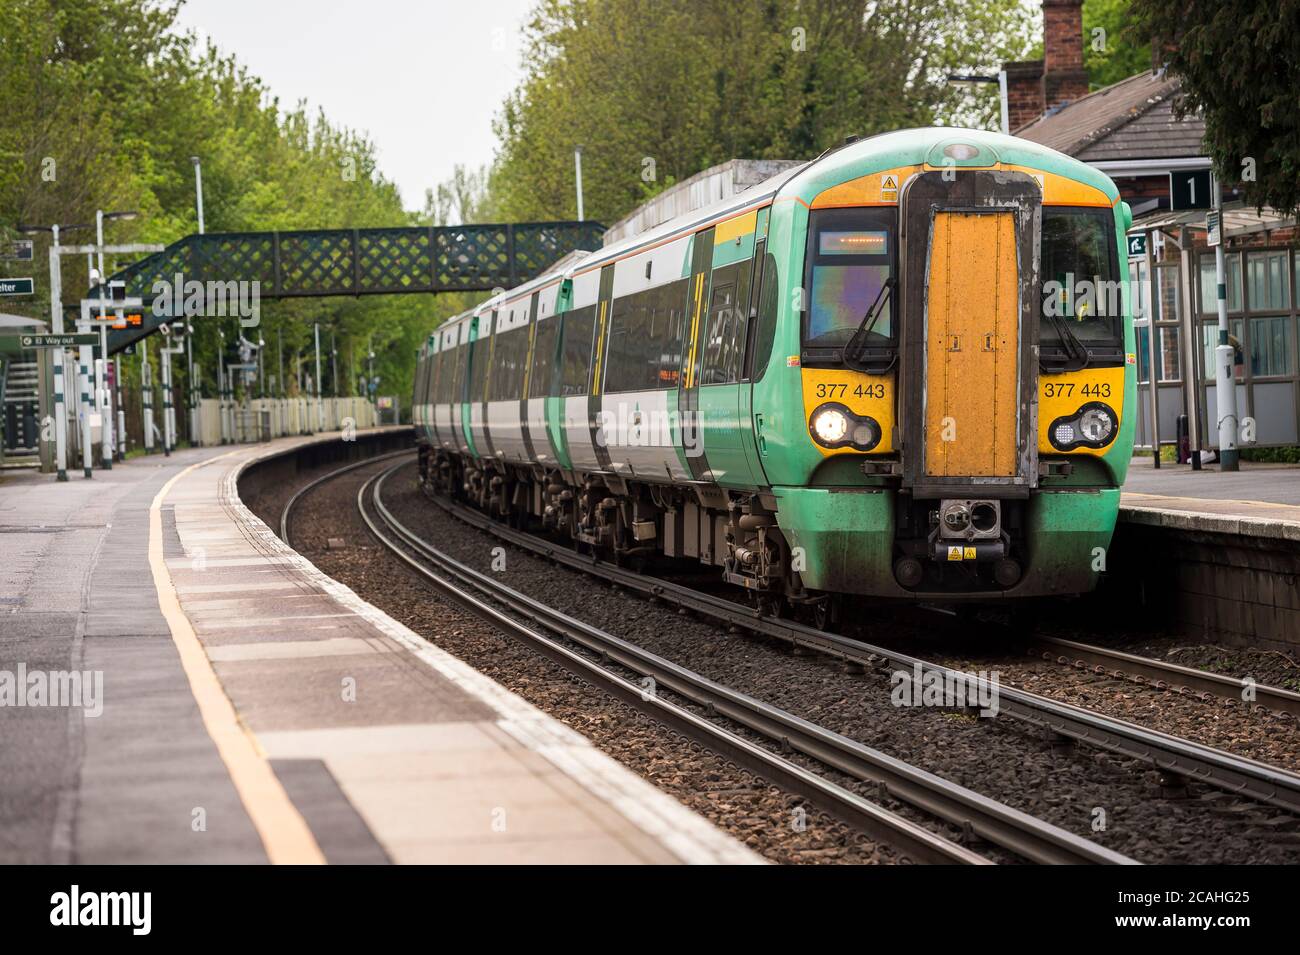 Class 377 passenger train in Southern Trains livery at a railway station, England. Stock Photo